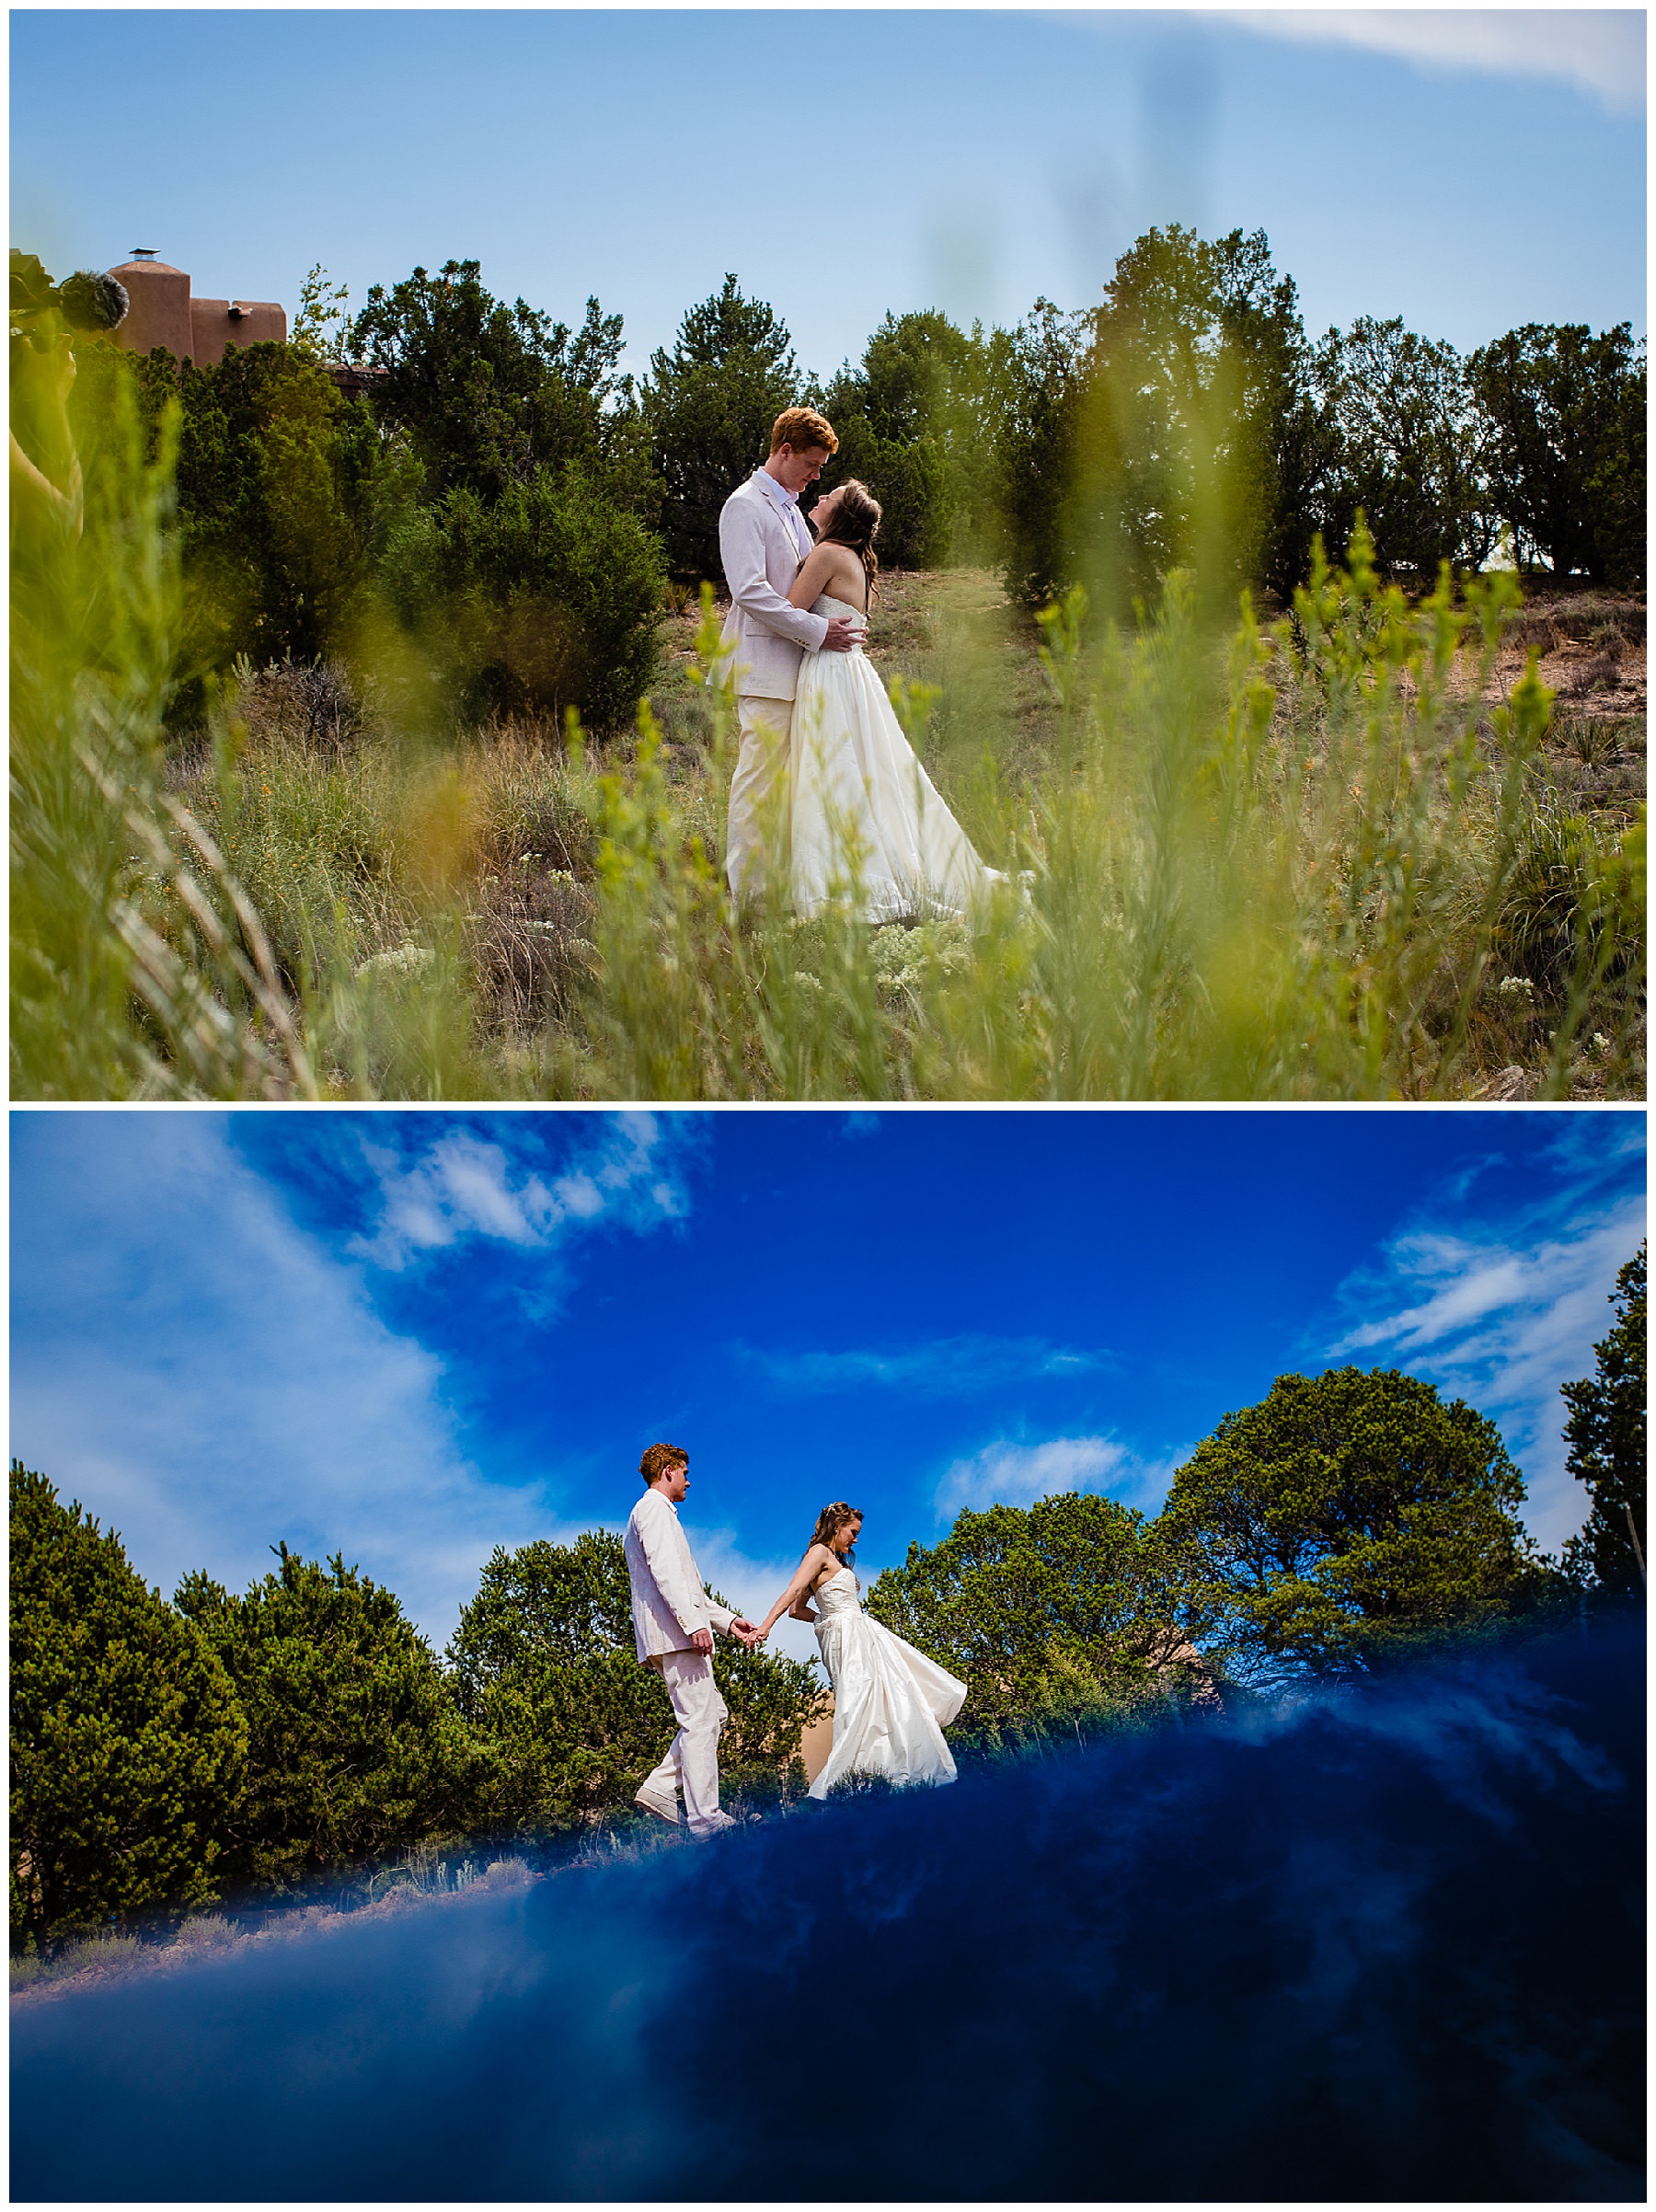 Romantic and creative images for backyard wedding in Santa Fe